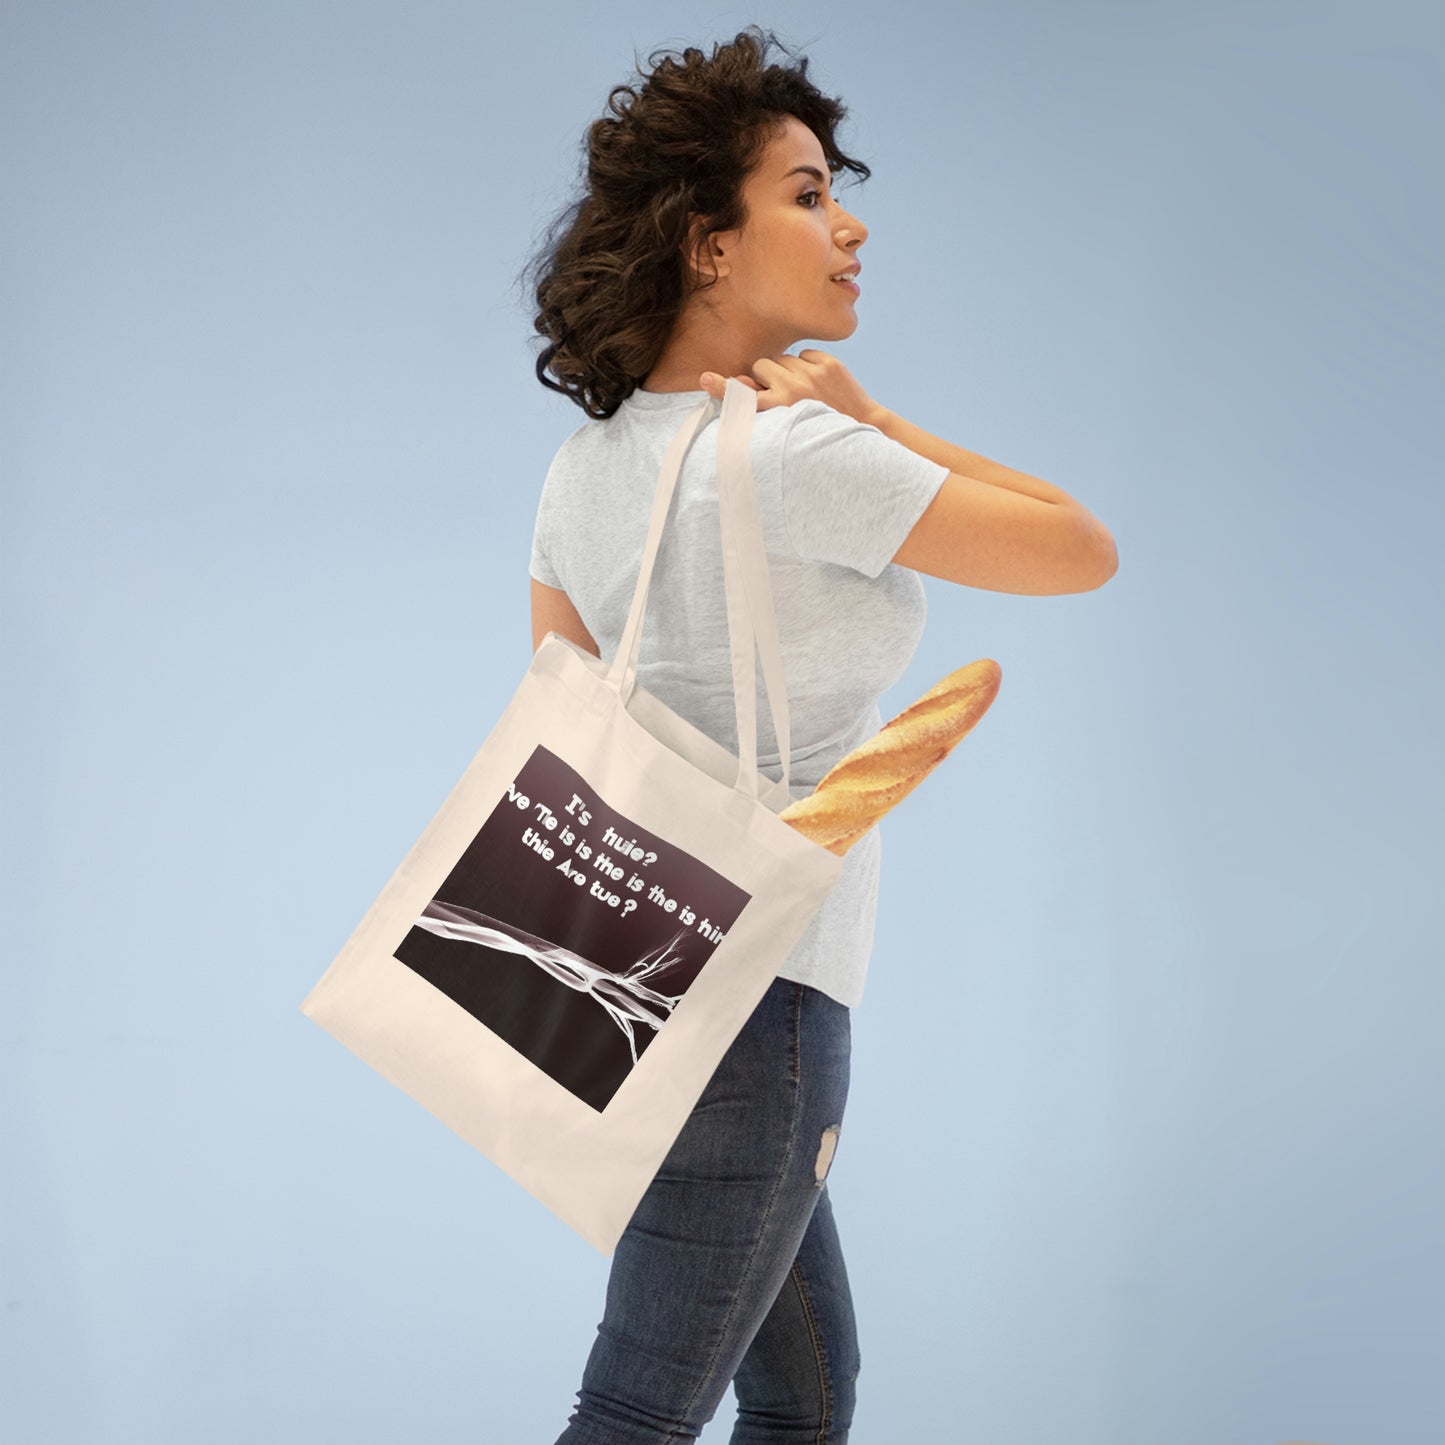 "The Meaning of Life: Exploring What it Means to be Truly Alive" - The Alien Tote Bag